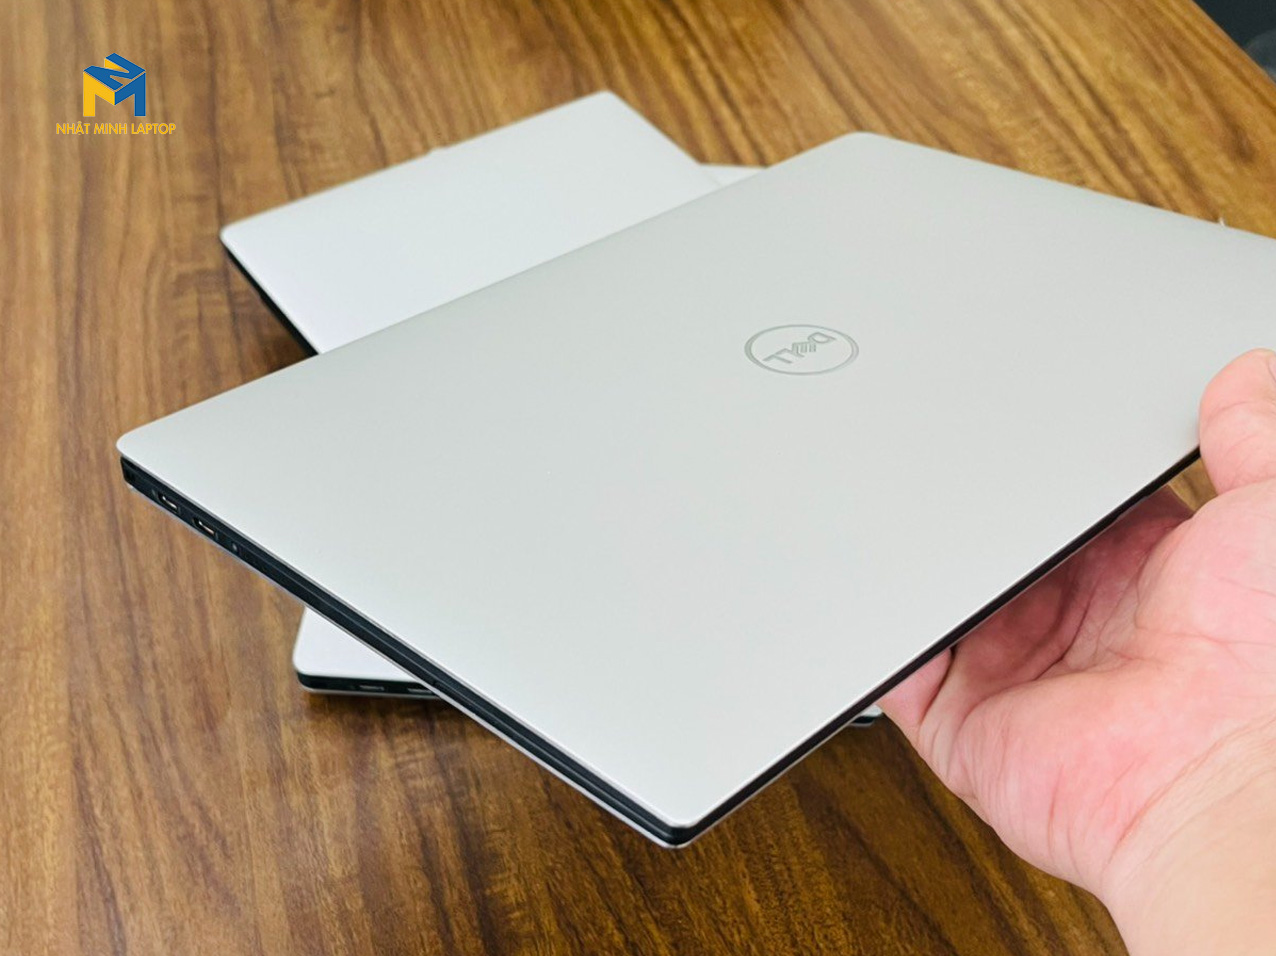 dell xps 13 cũ